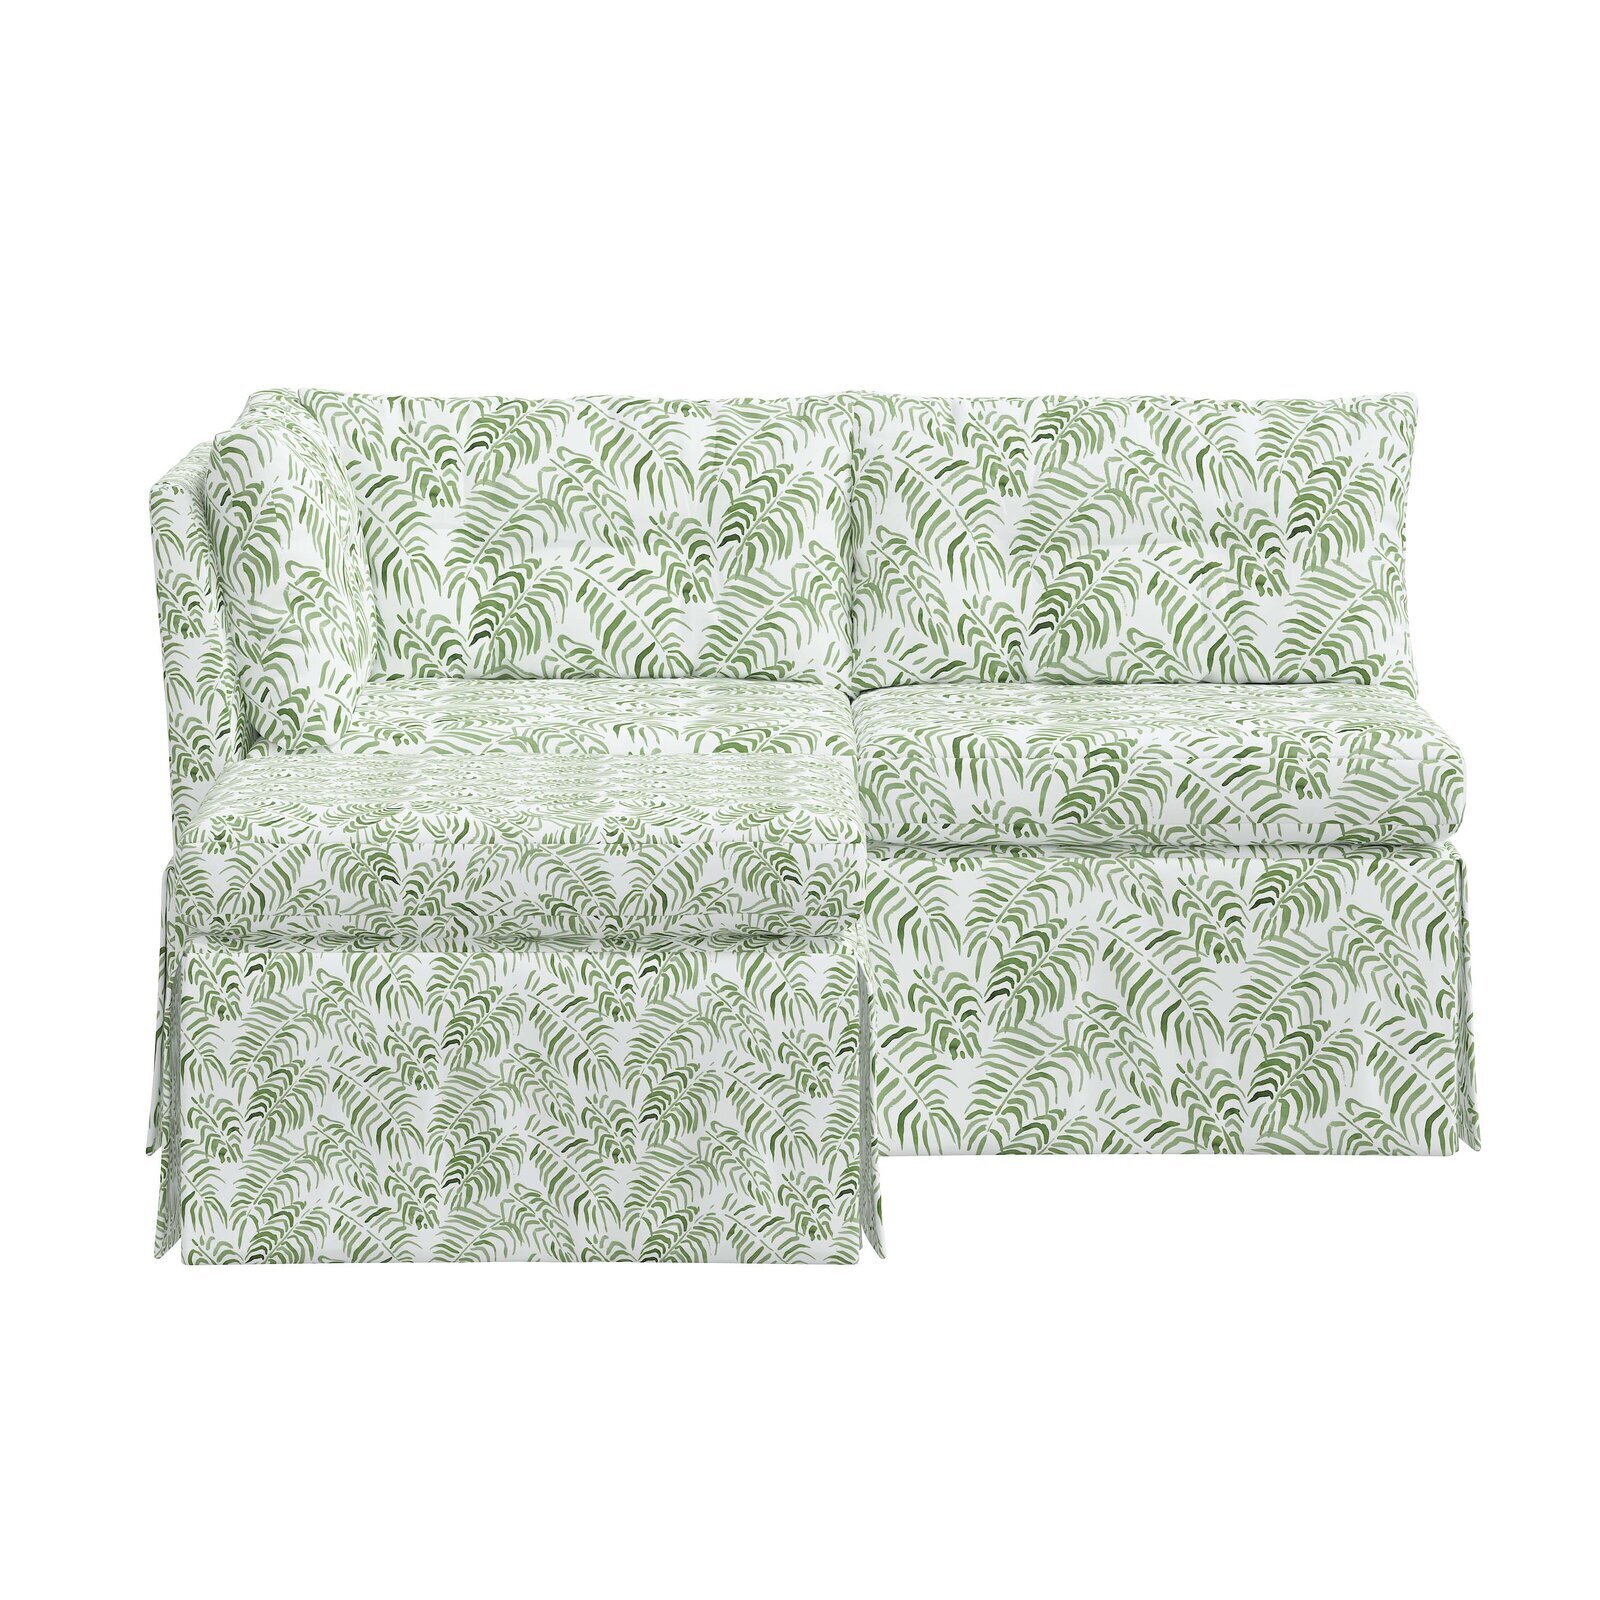 Patterned green sectional couch